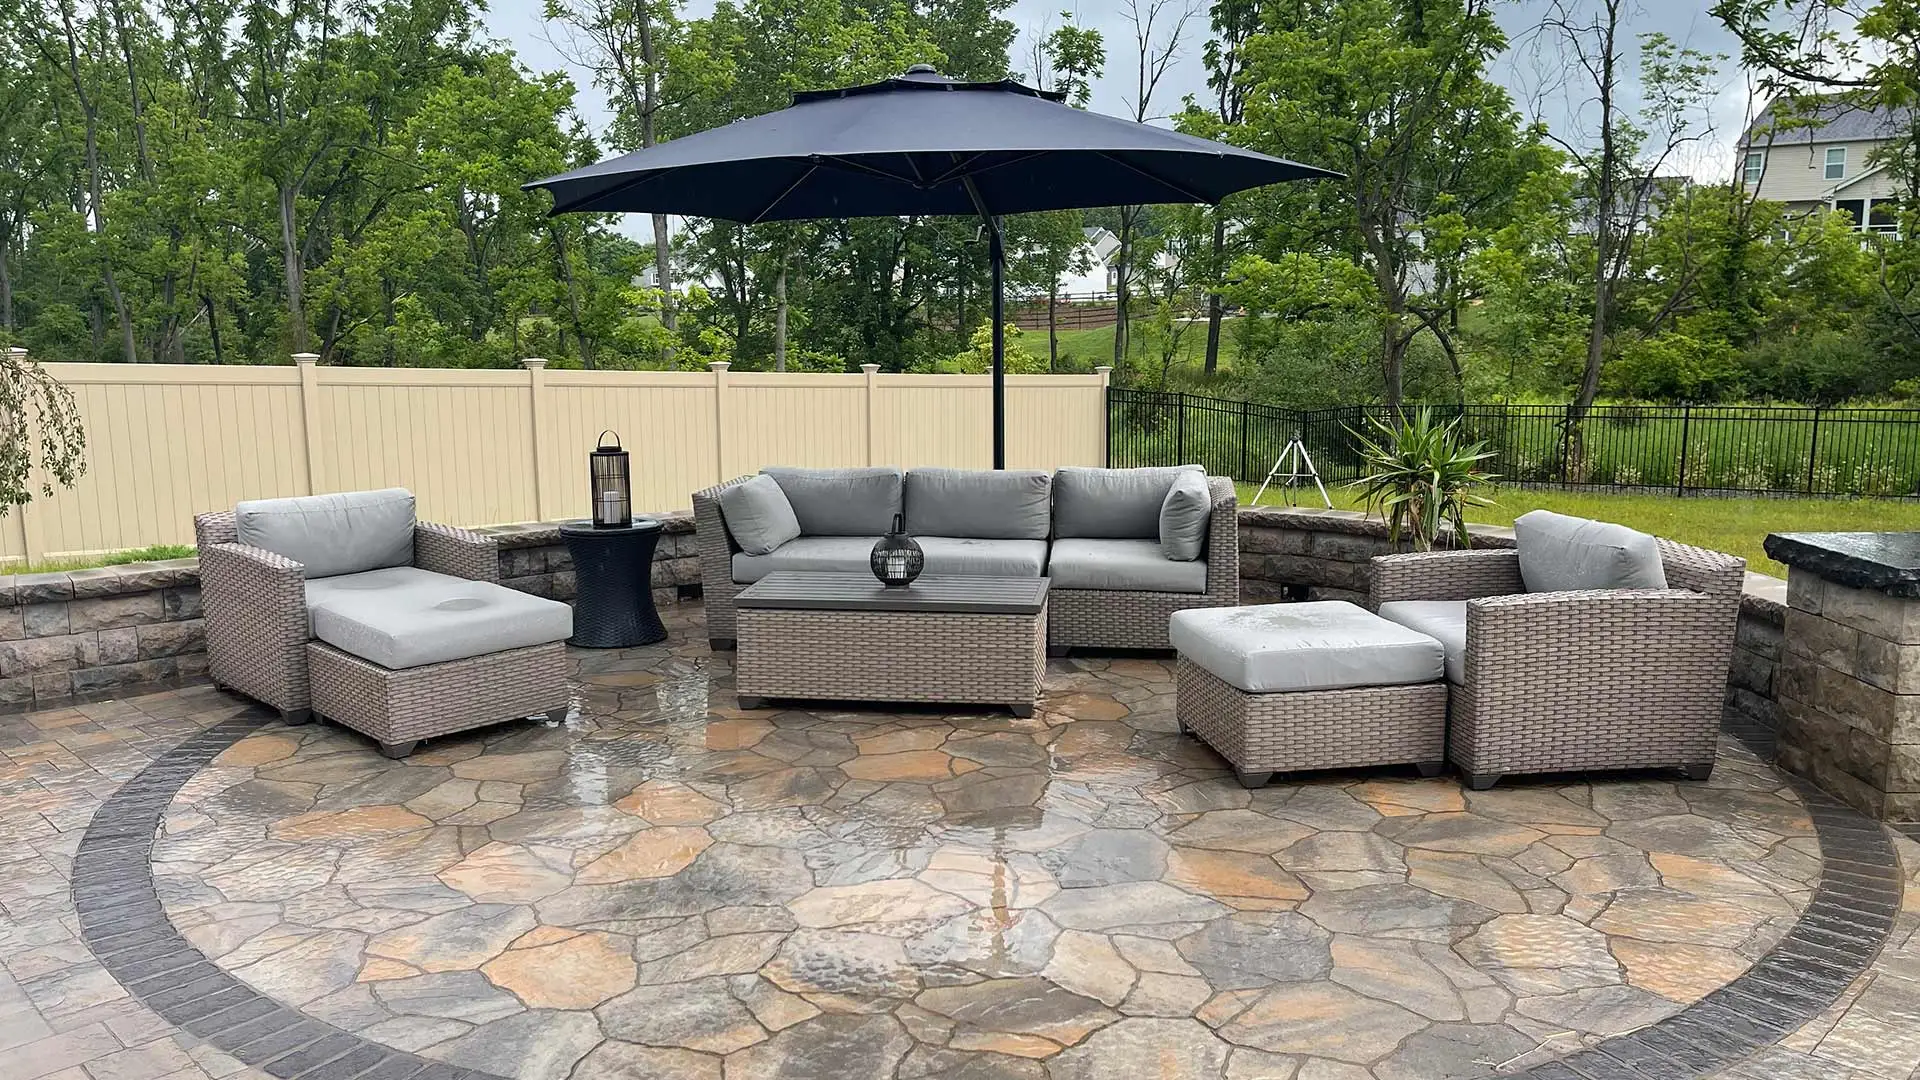 Custom outdoor patio with seating and umbrella near Easton, PA.